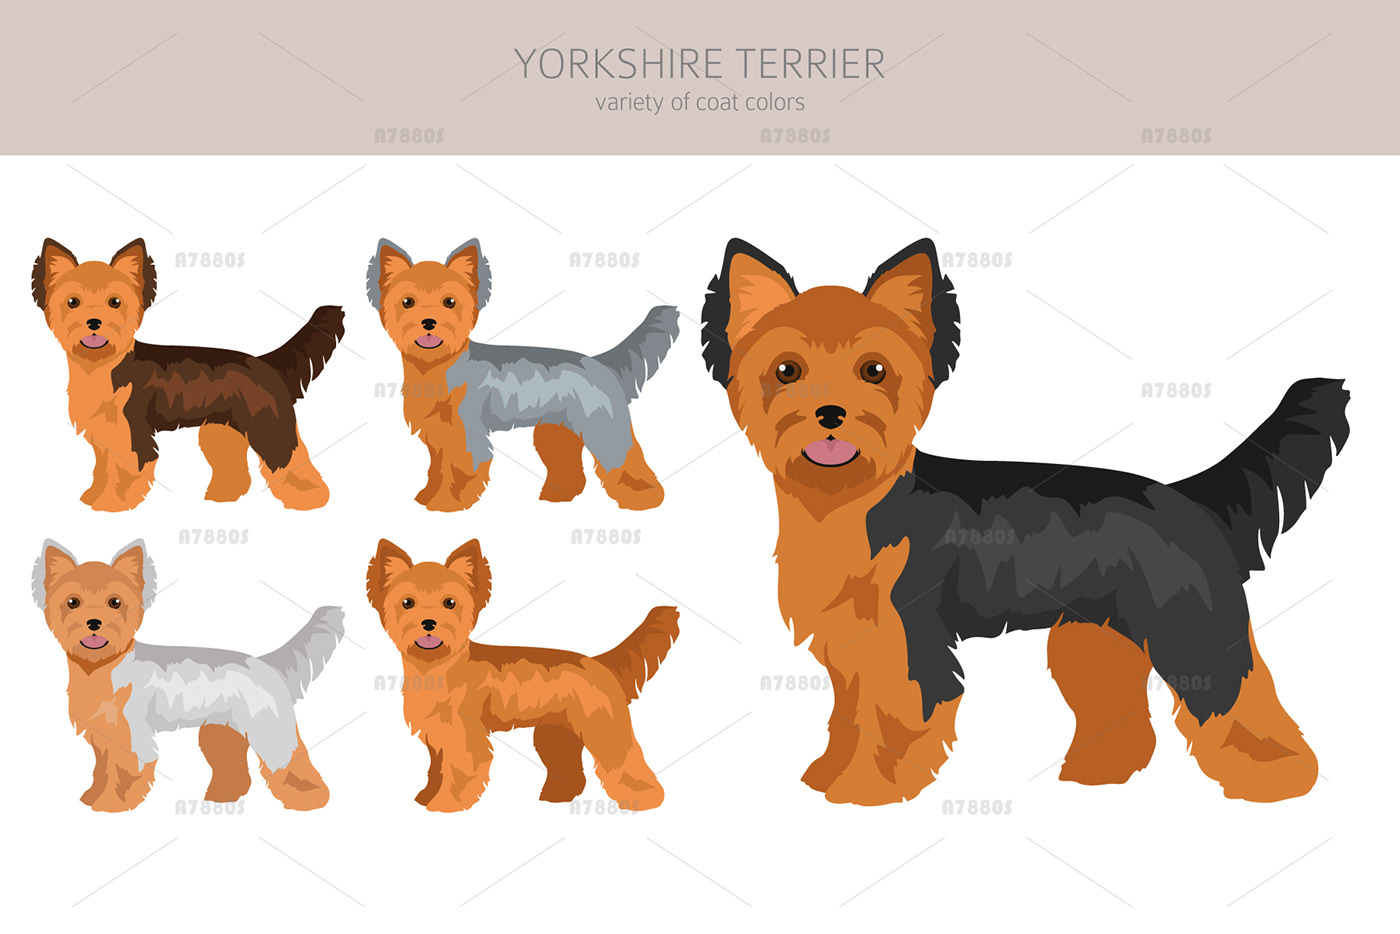 Yorkie puppy Pet graphic color yorkshire dog dog breed terrier yorkshire terrier